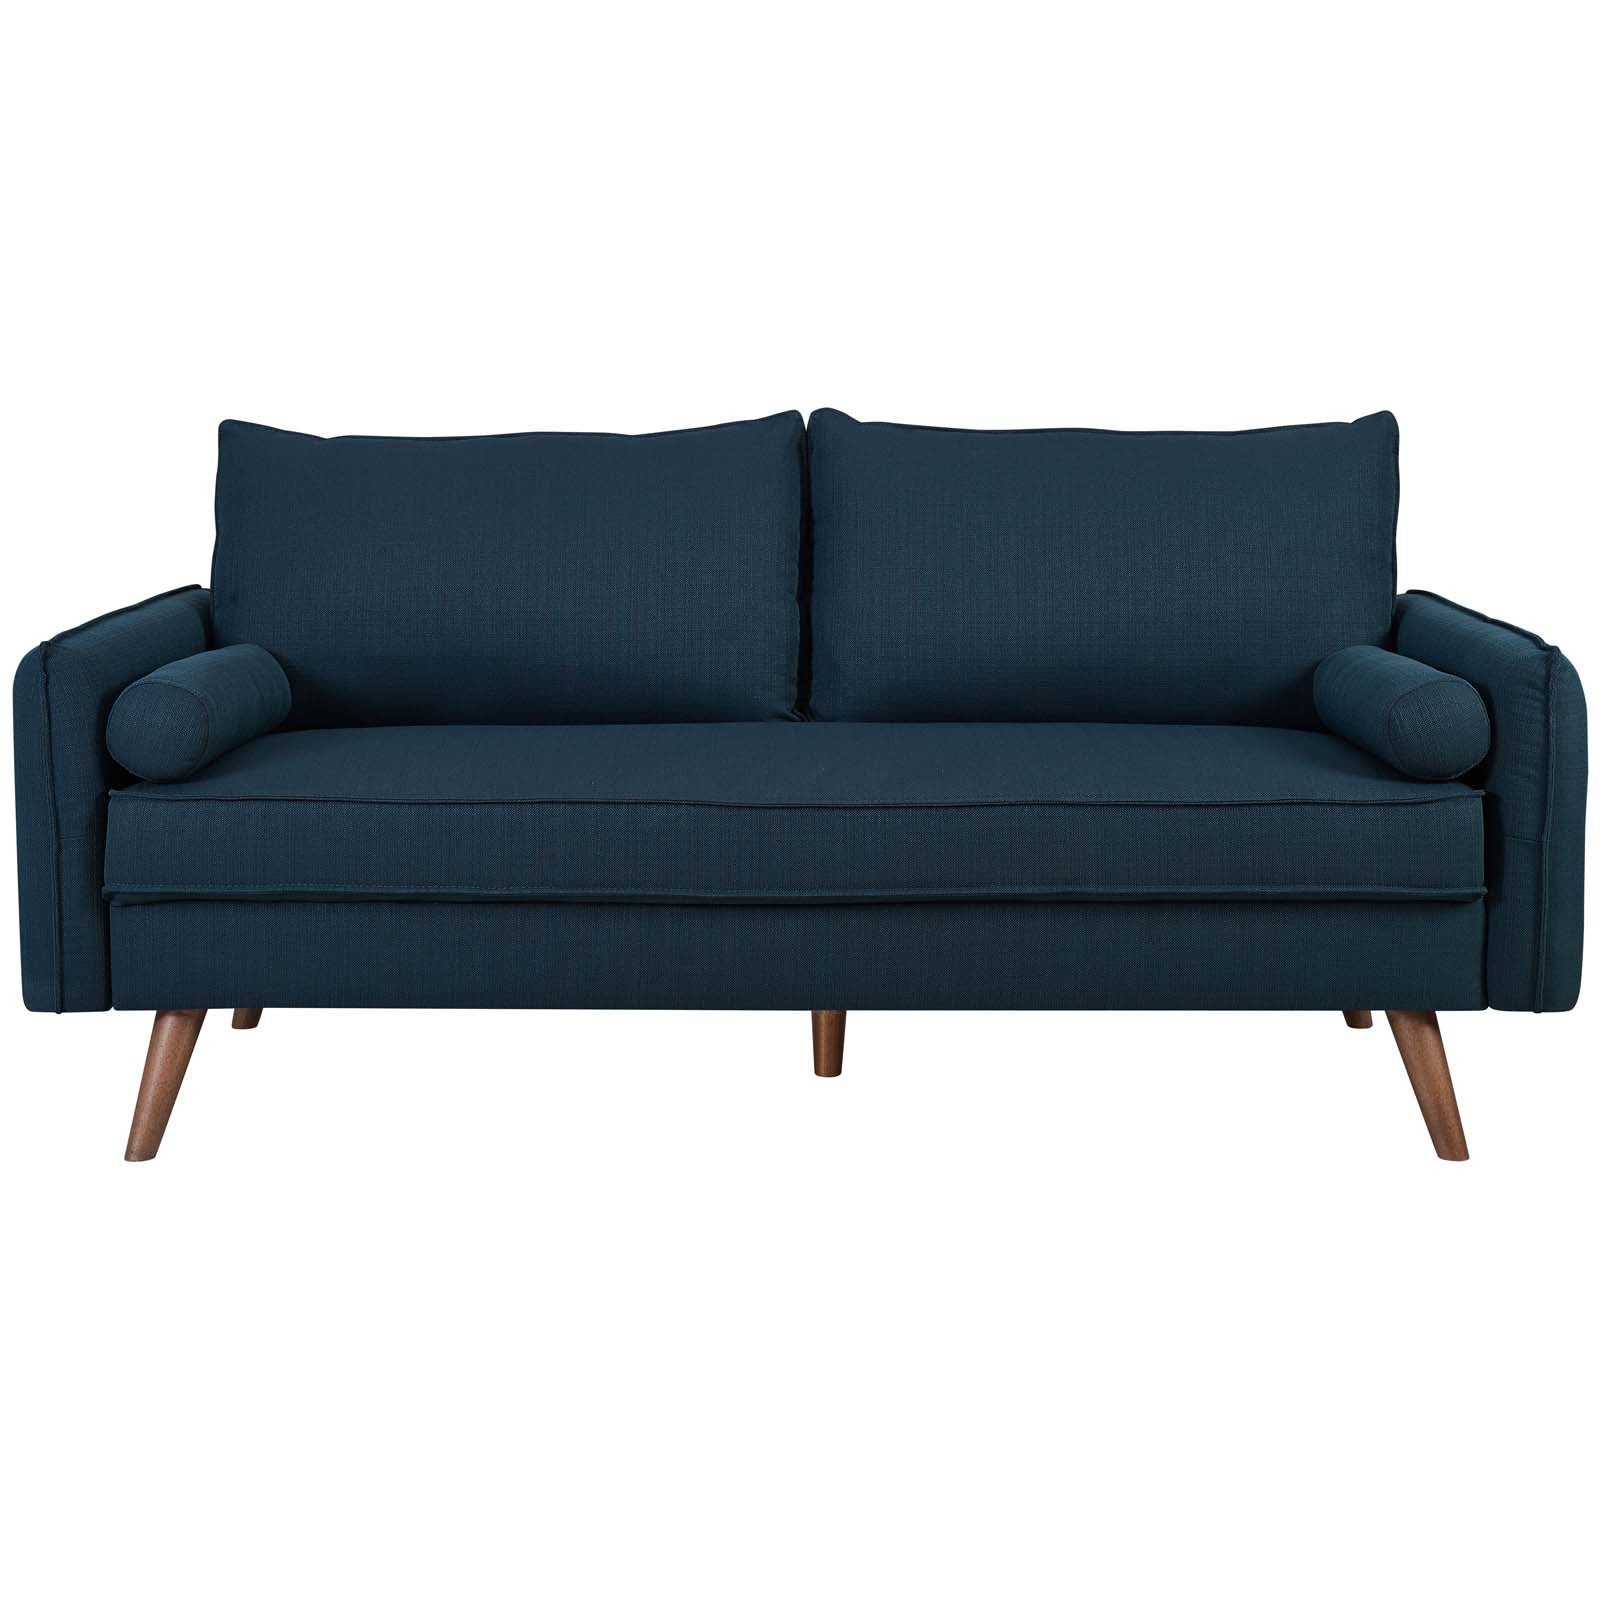 Modway Sofas & Couches - Revive Upholstered Fabric Sofa Azure